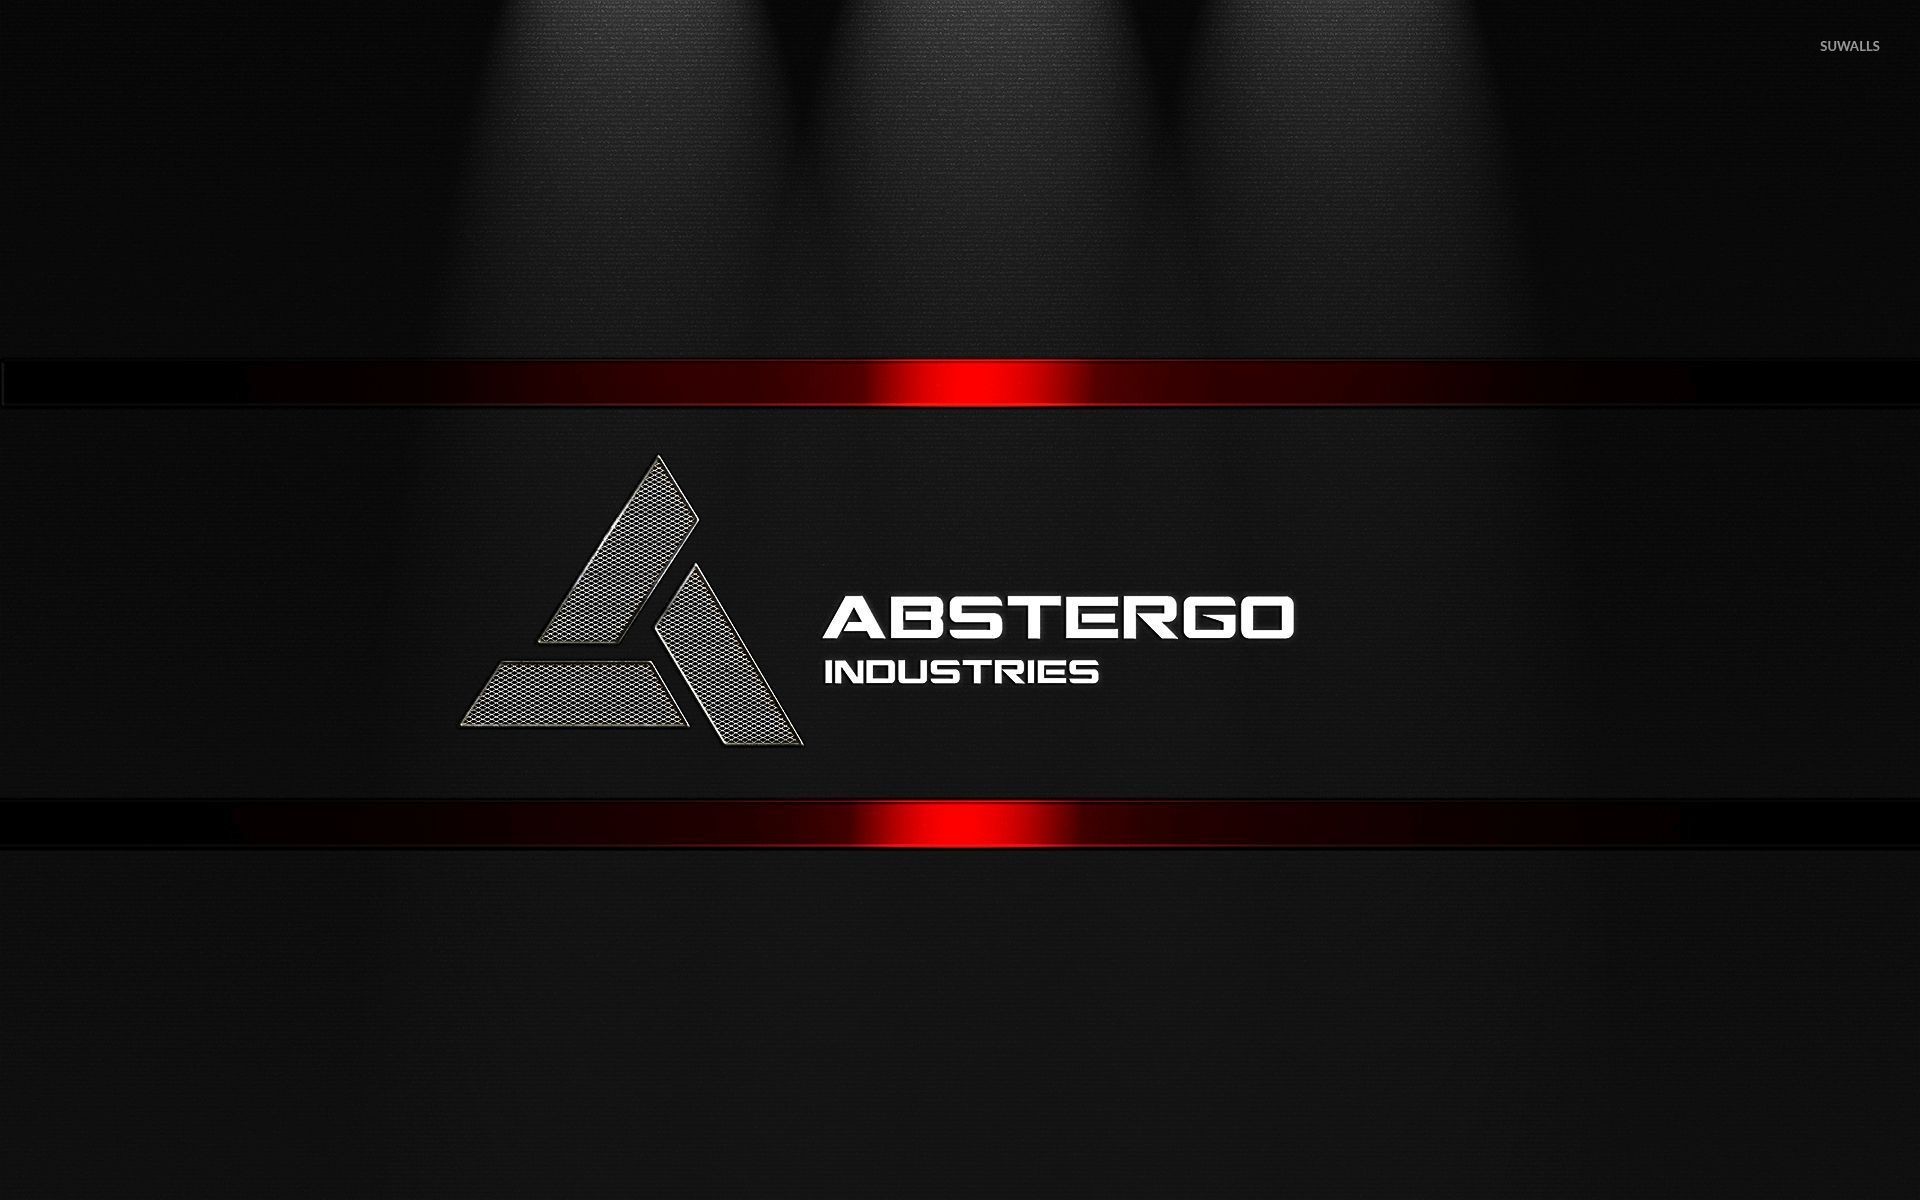 1920x1200 Abstergo Industries - Assassin's Creed wallpaper